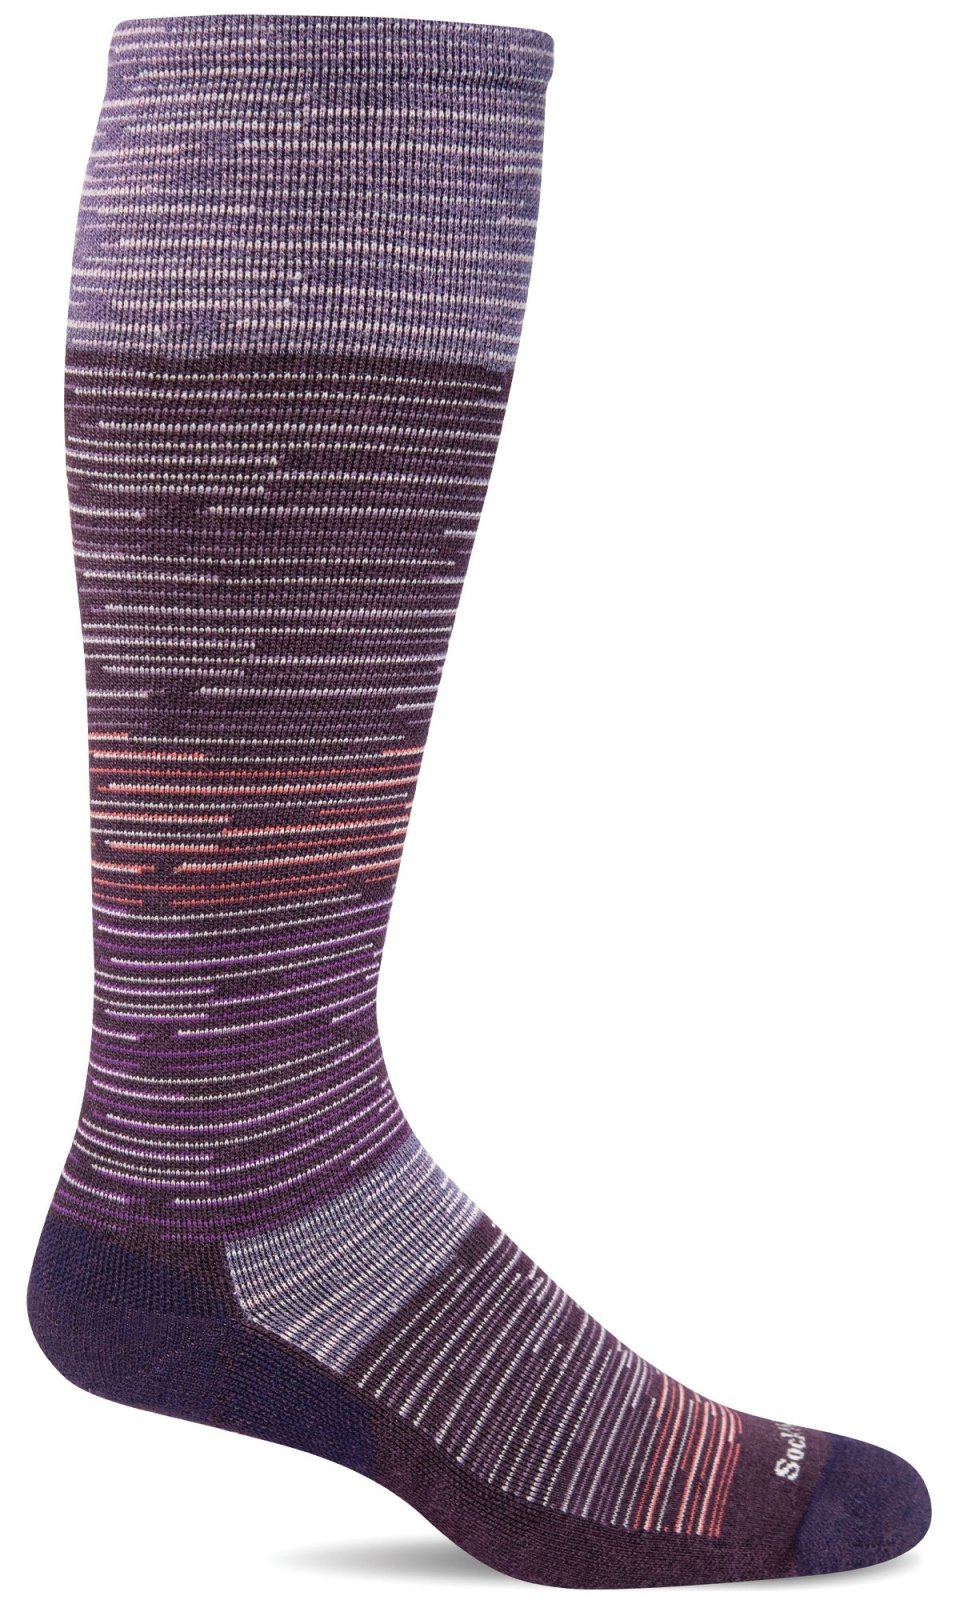 Women's Good Vibes | Moderate Graduated Compression Socks - Merino Wool Lifestyle Compression - Sockwell